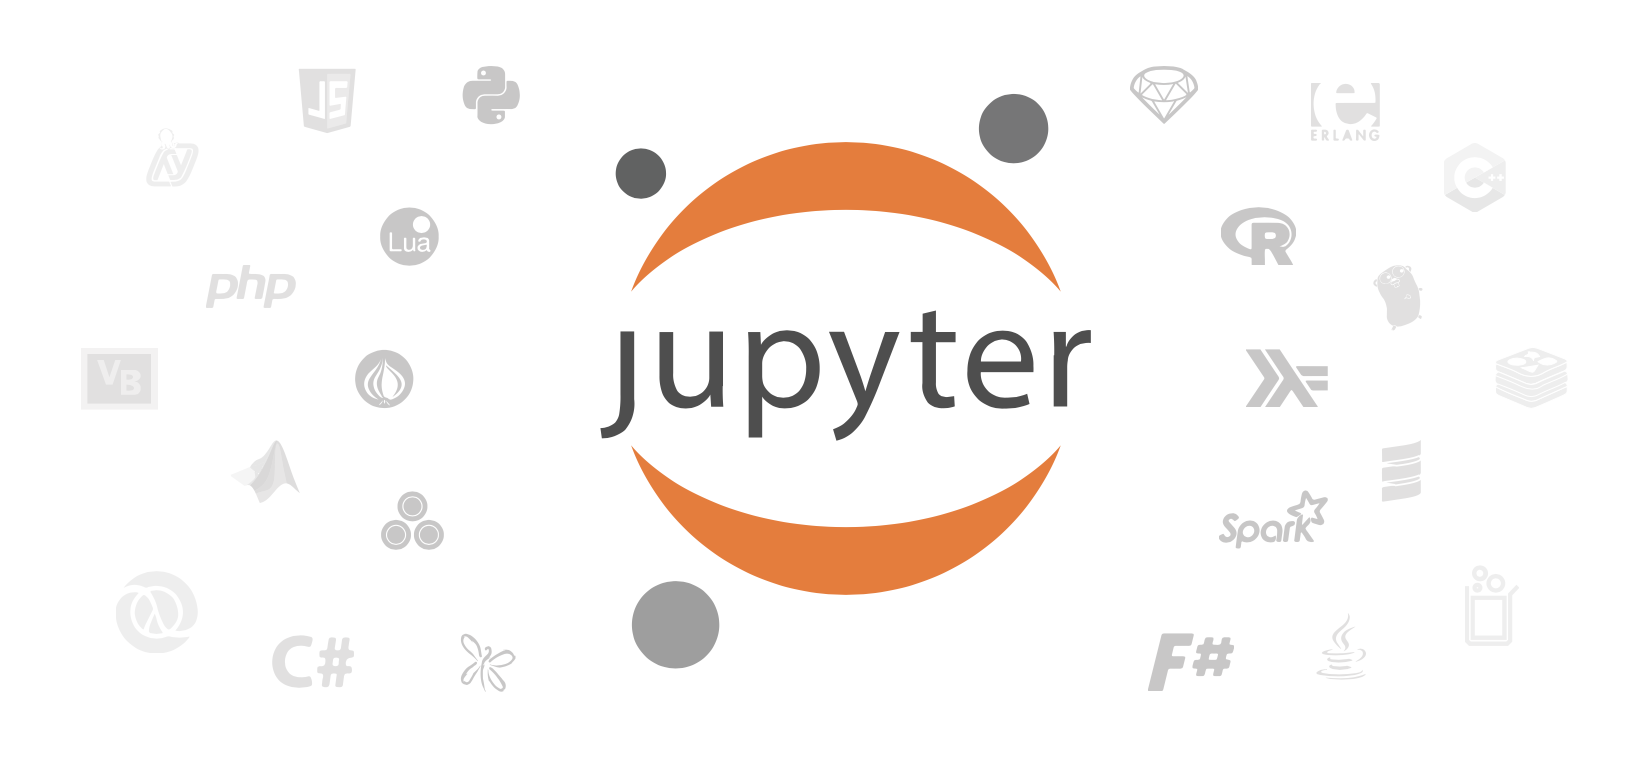 picoCTF - Insp3ct0r with Jupyter